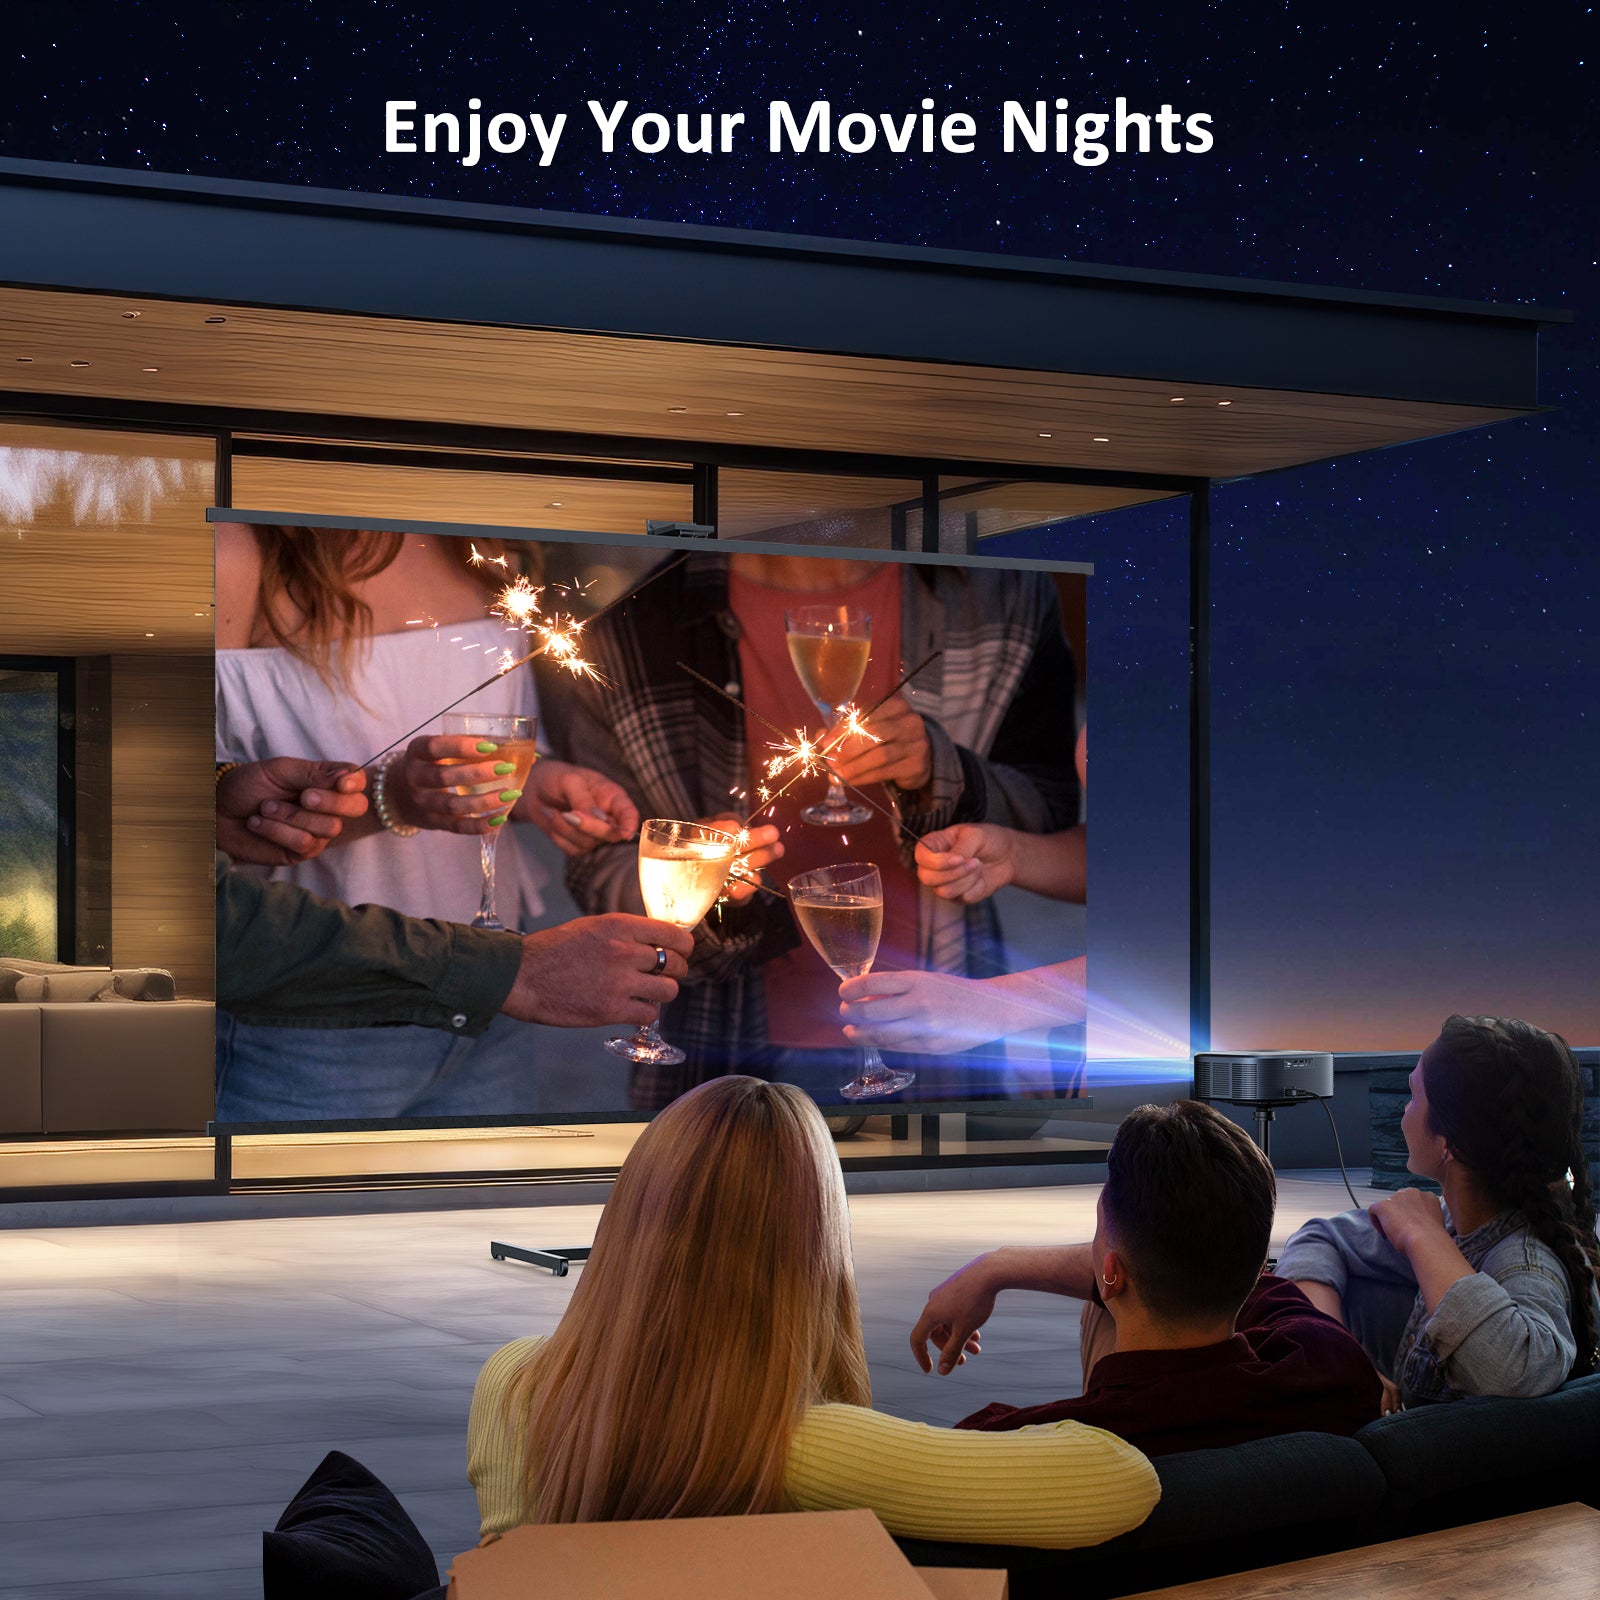 Enjoy a captivating movie night on the balcony as two girls and a boy indulge in the PJ30 Ultra experience.